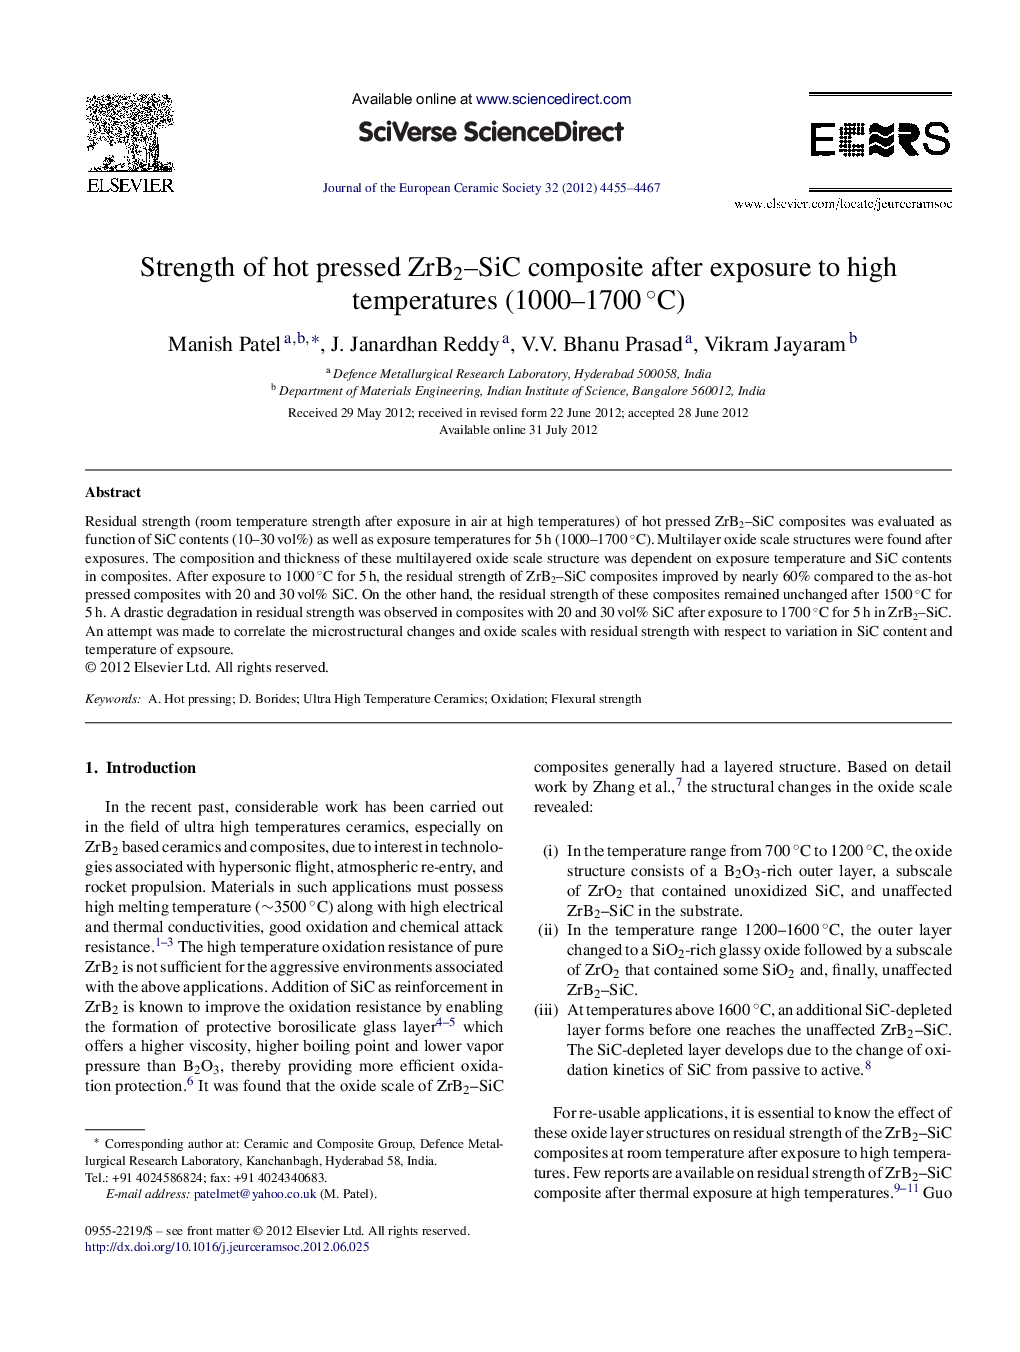 Strength of hot pressed ZrB2–SiC composite after exposure to high temperatures (1000–1700 °C)